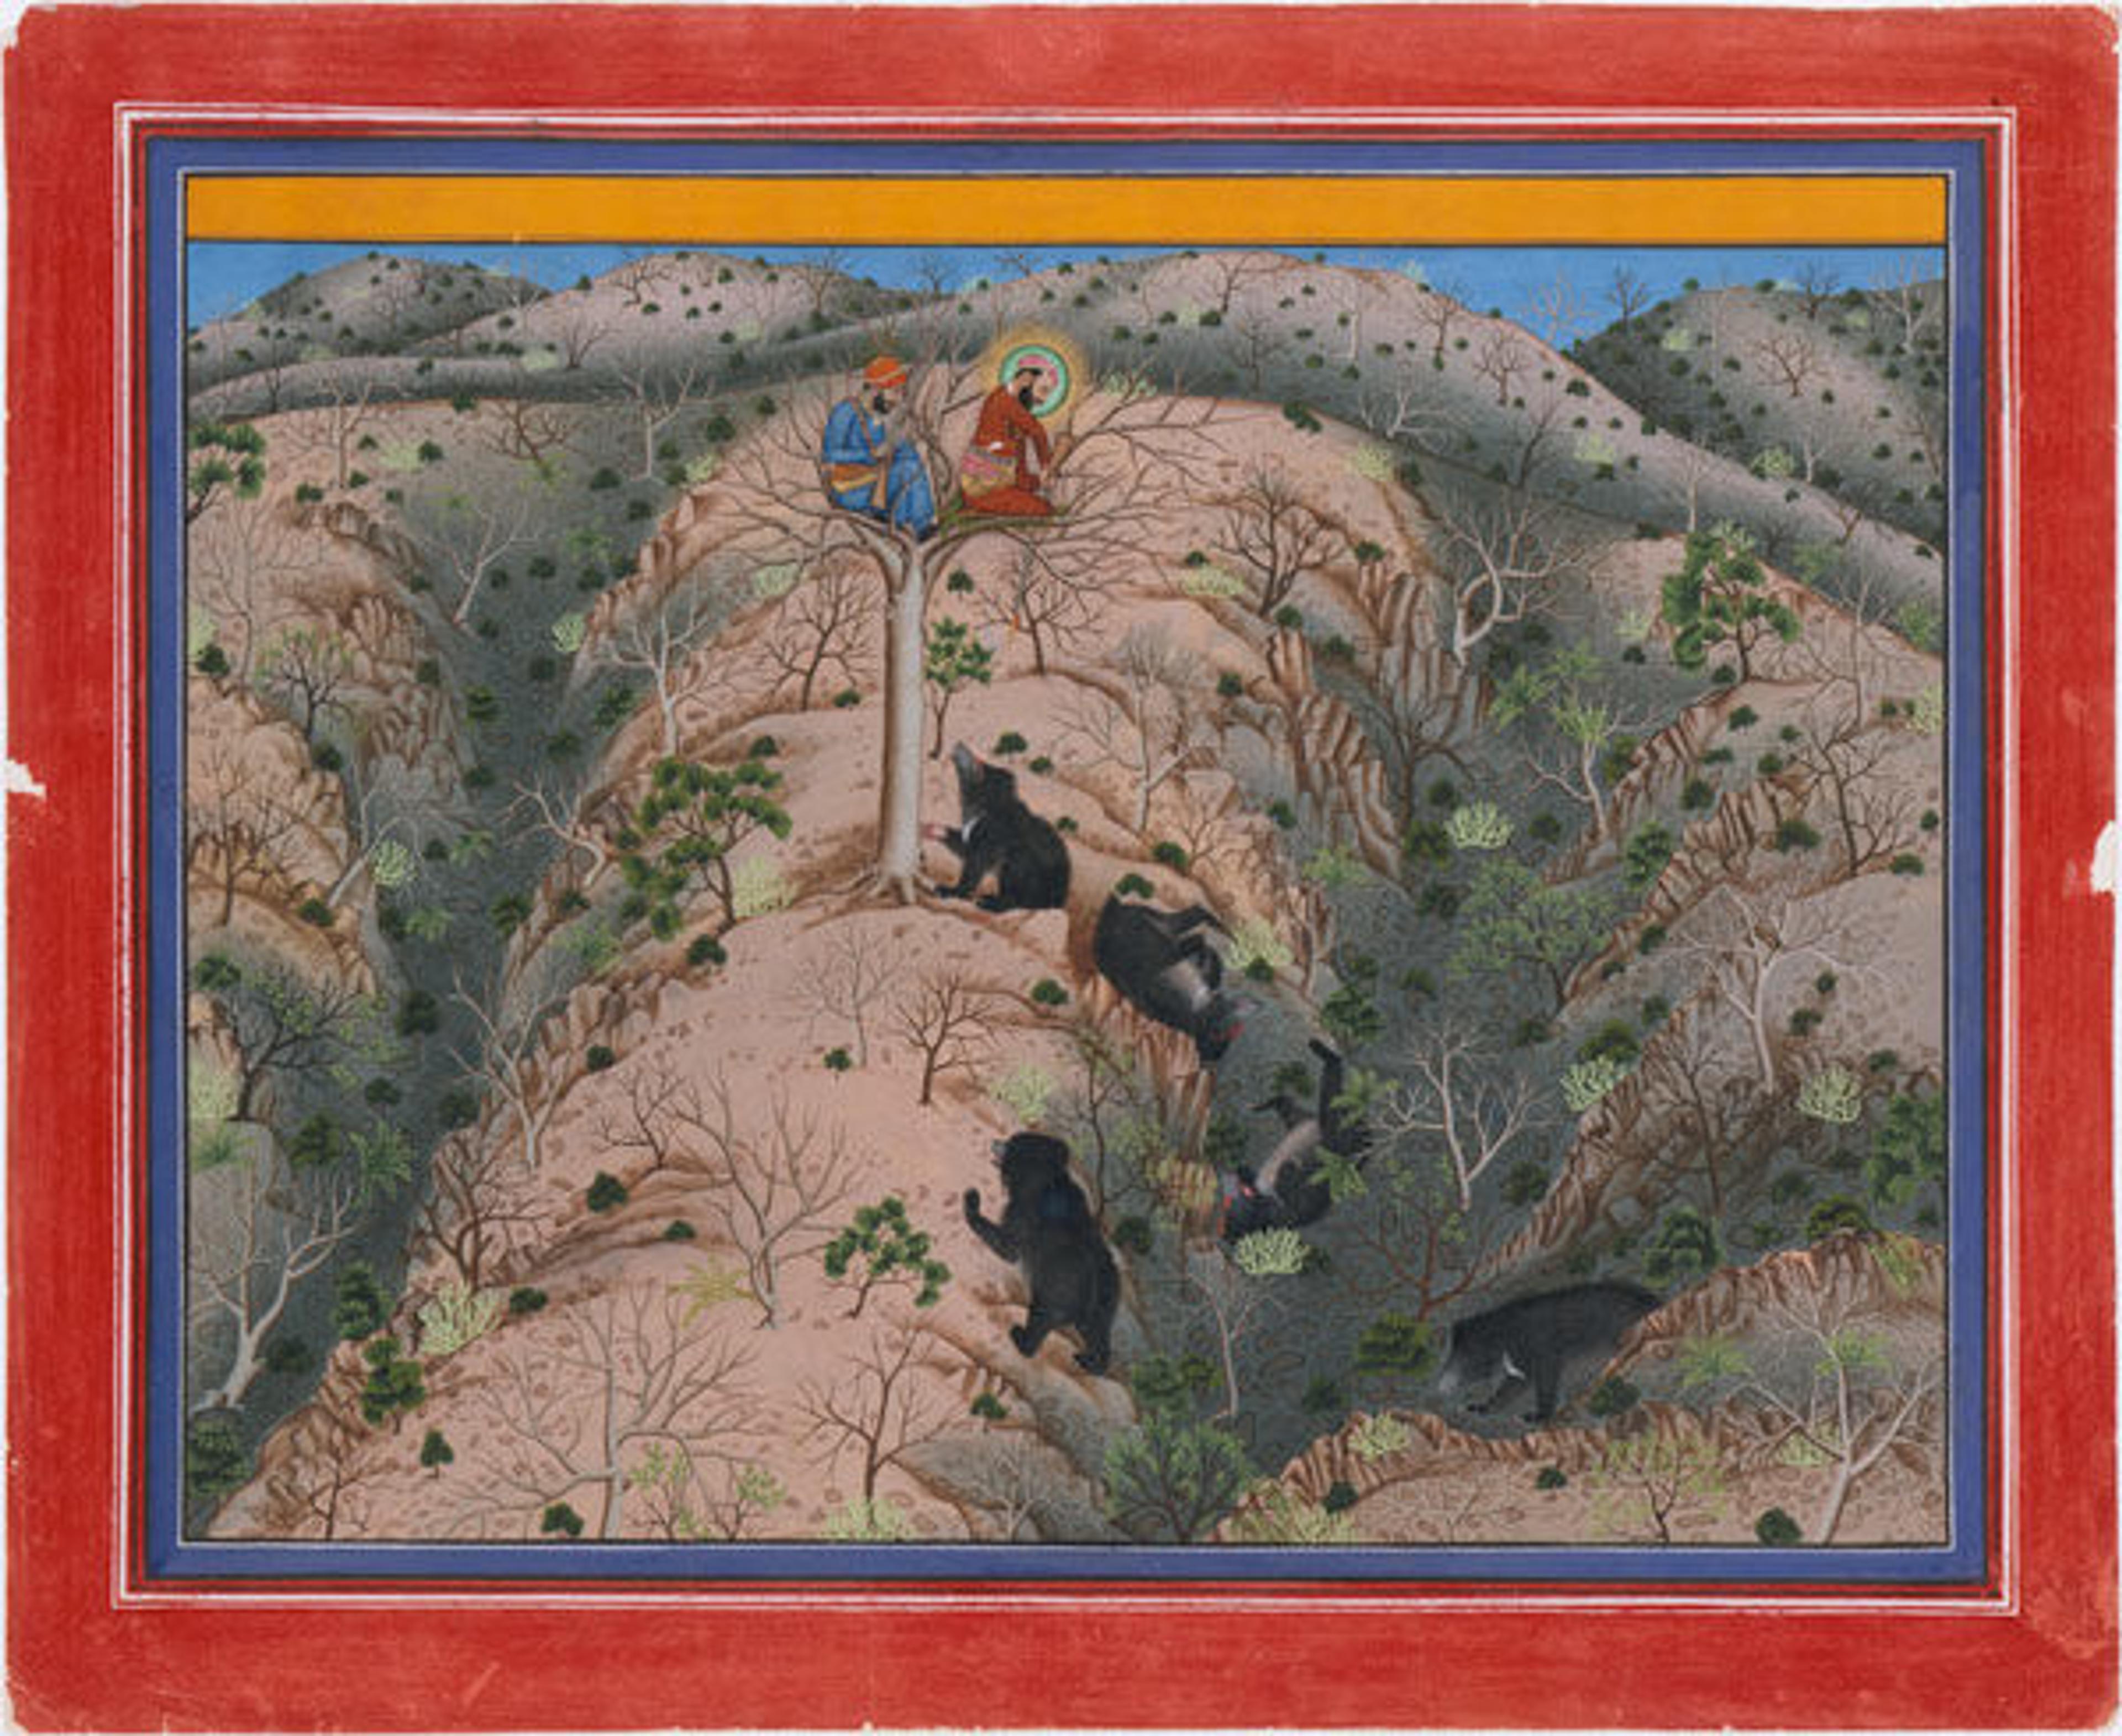 Attributed to Pannalai. Maharaja Fateh Singh Hunting Female Bears, dated 1917. Western India, Rajasthan, Udaipur. Ink, opaque watercolor, and gold on paper; 13 3/8 x 18 1/4 in. (34 x 46.4 cm). The Metropolitan Museum of Art, New York, Purchase, Cynthia Hazen Polsky Gift, 1992 (1992.7.1)